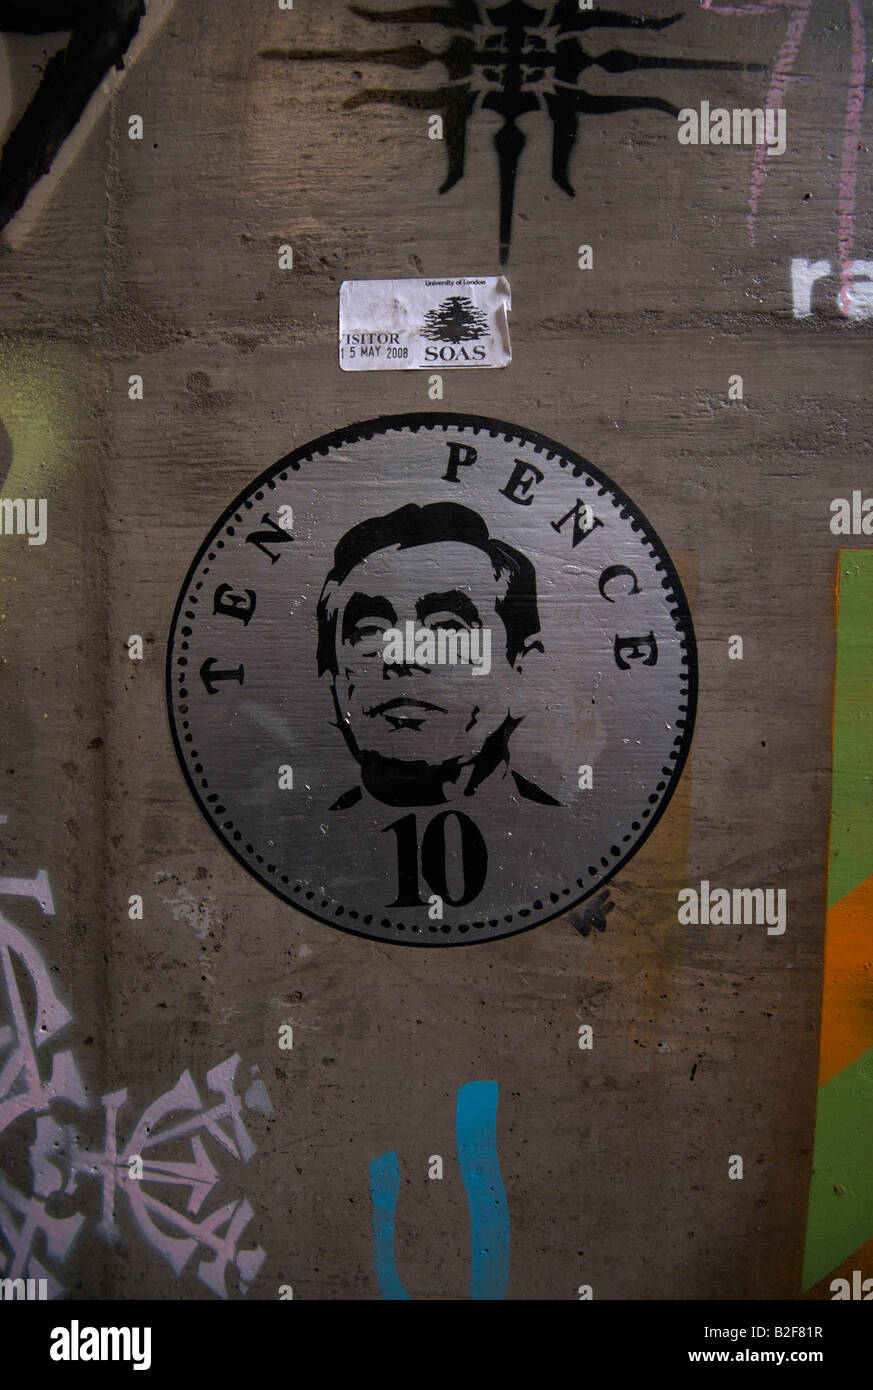 Cans Festival stencil grafitti artwork 10p coin and Gordon Brown on a wall underneath Waterloo train station, London, UK. Stock Photo